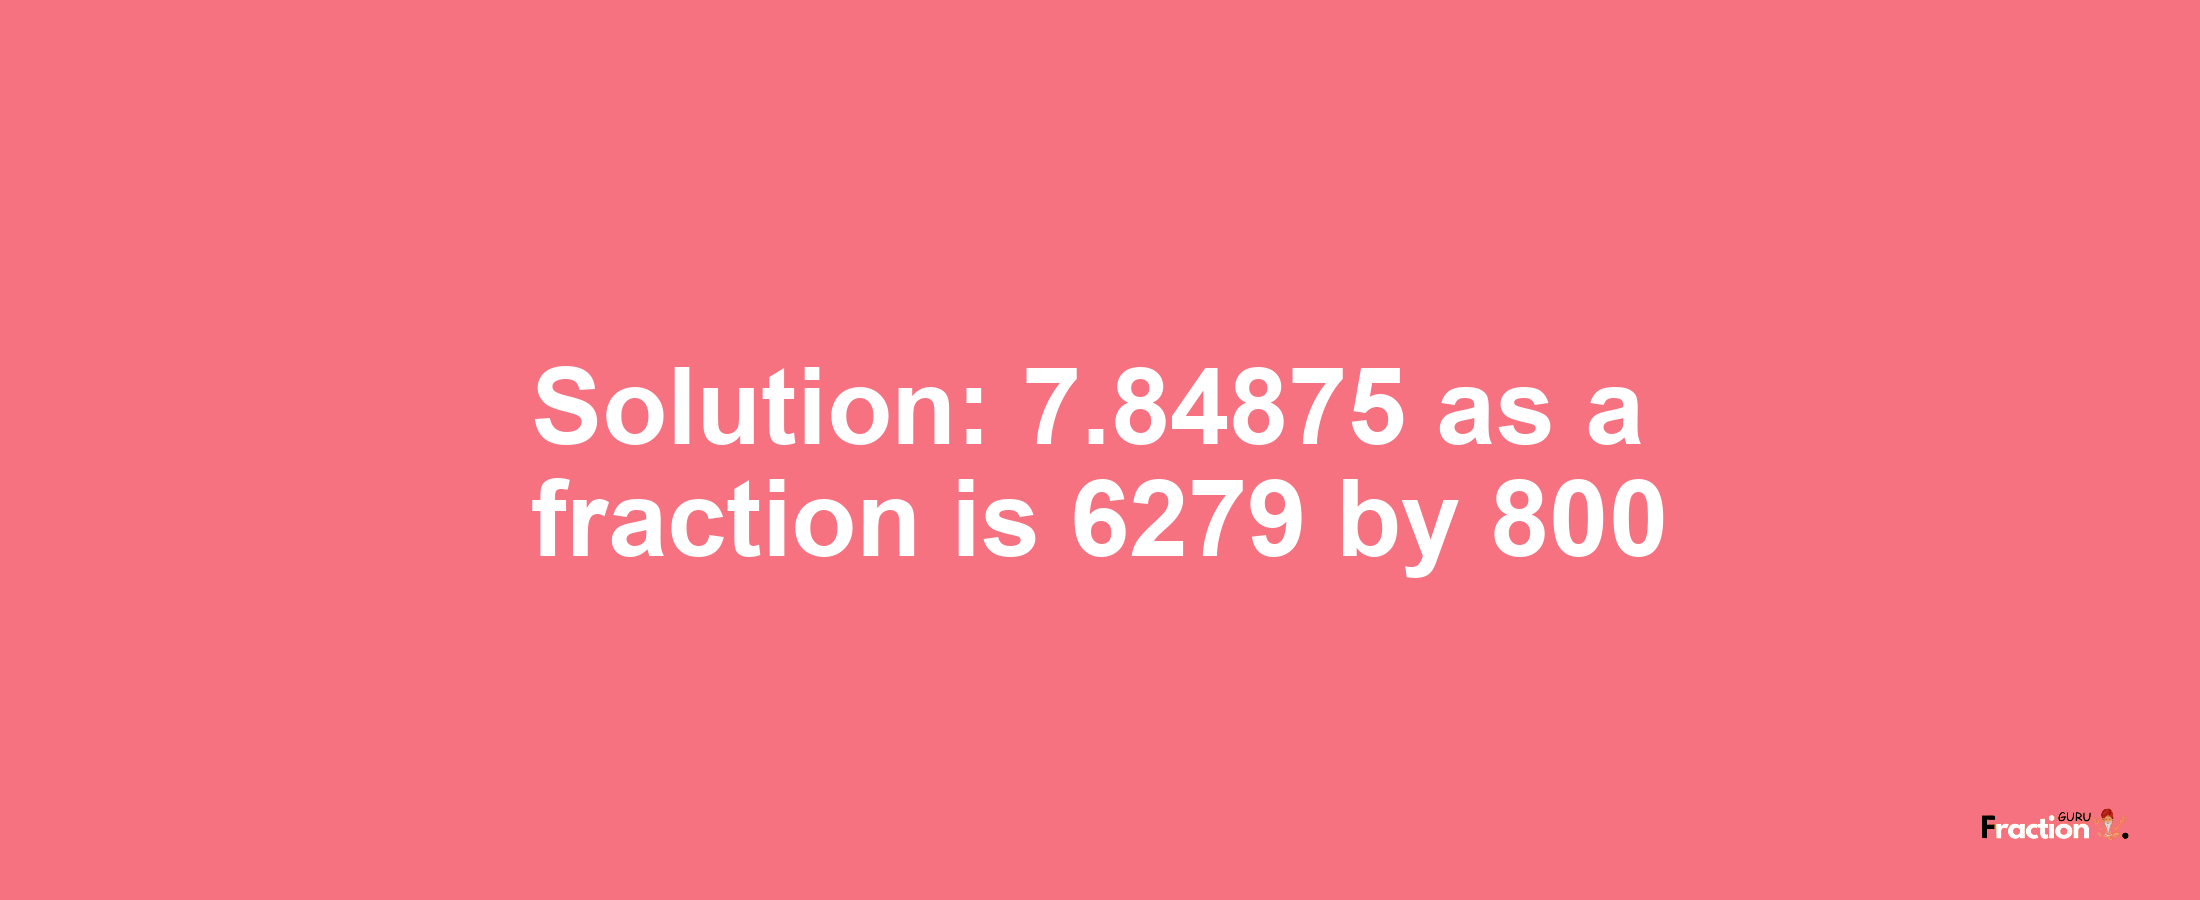 Solution:7.84875 as a fraction is 6279/800